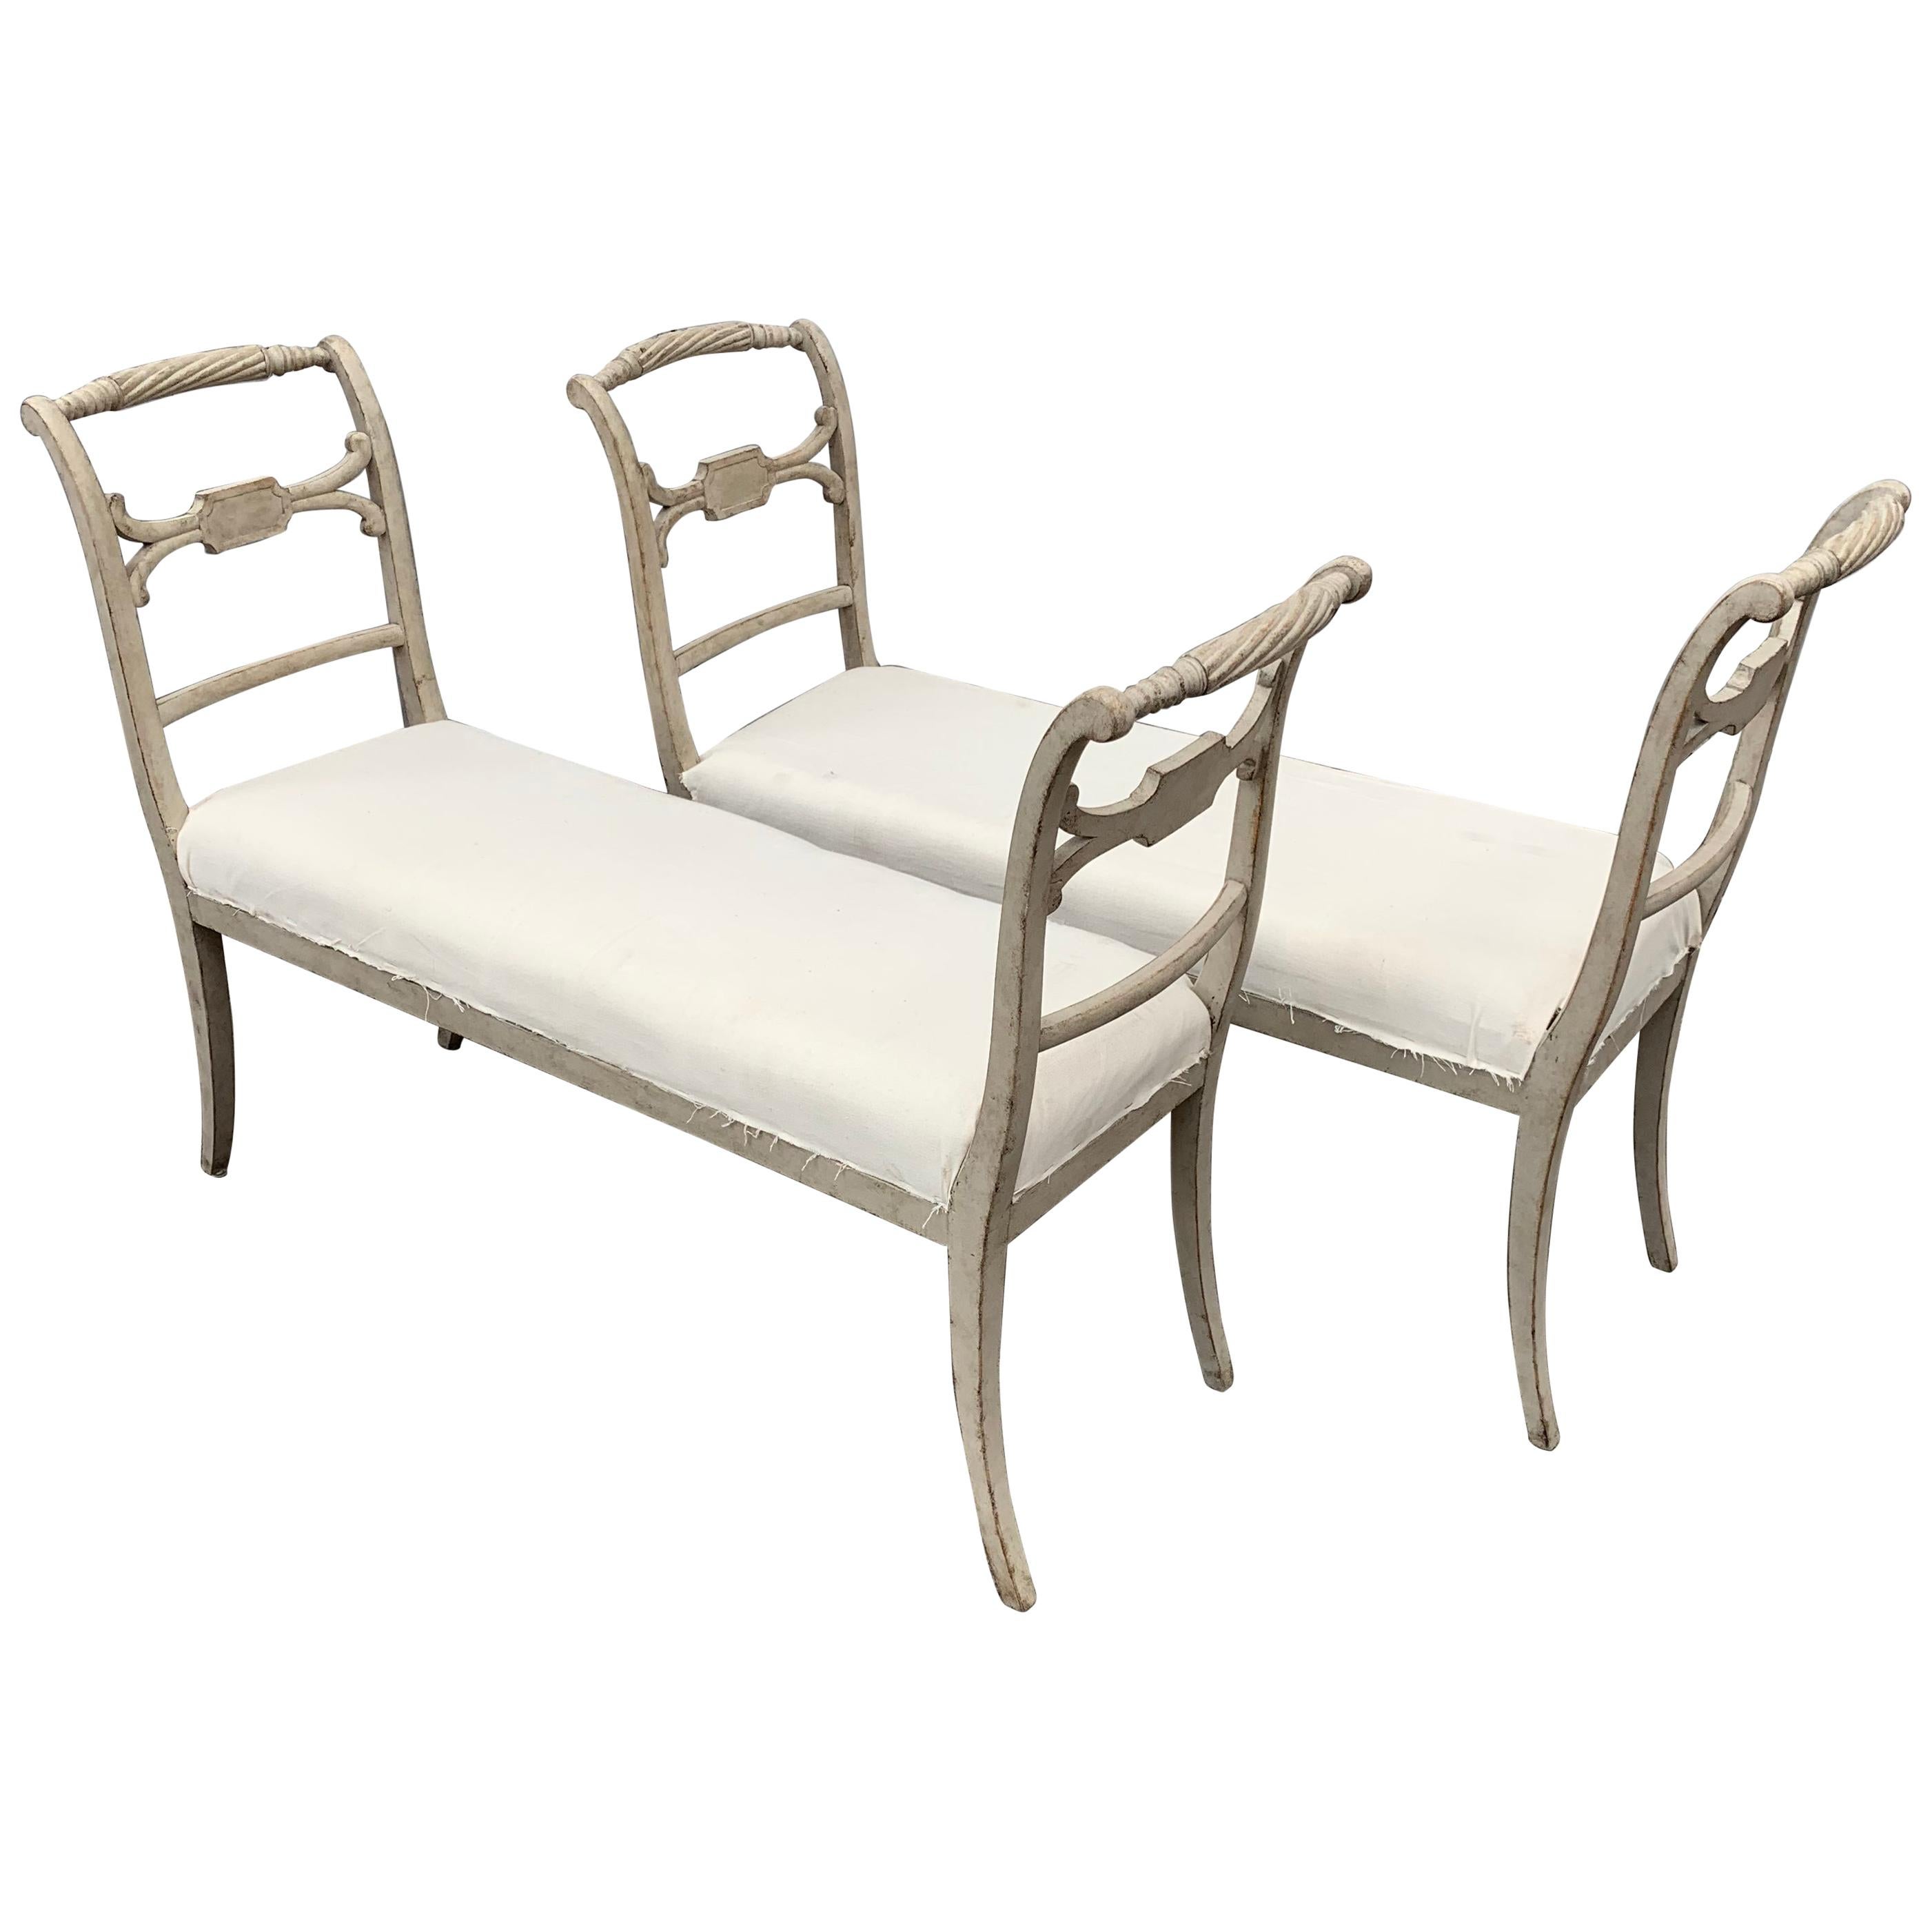 Pair of Swedish Gustavian Style Grey Painted Benches or Settees